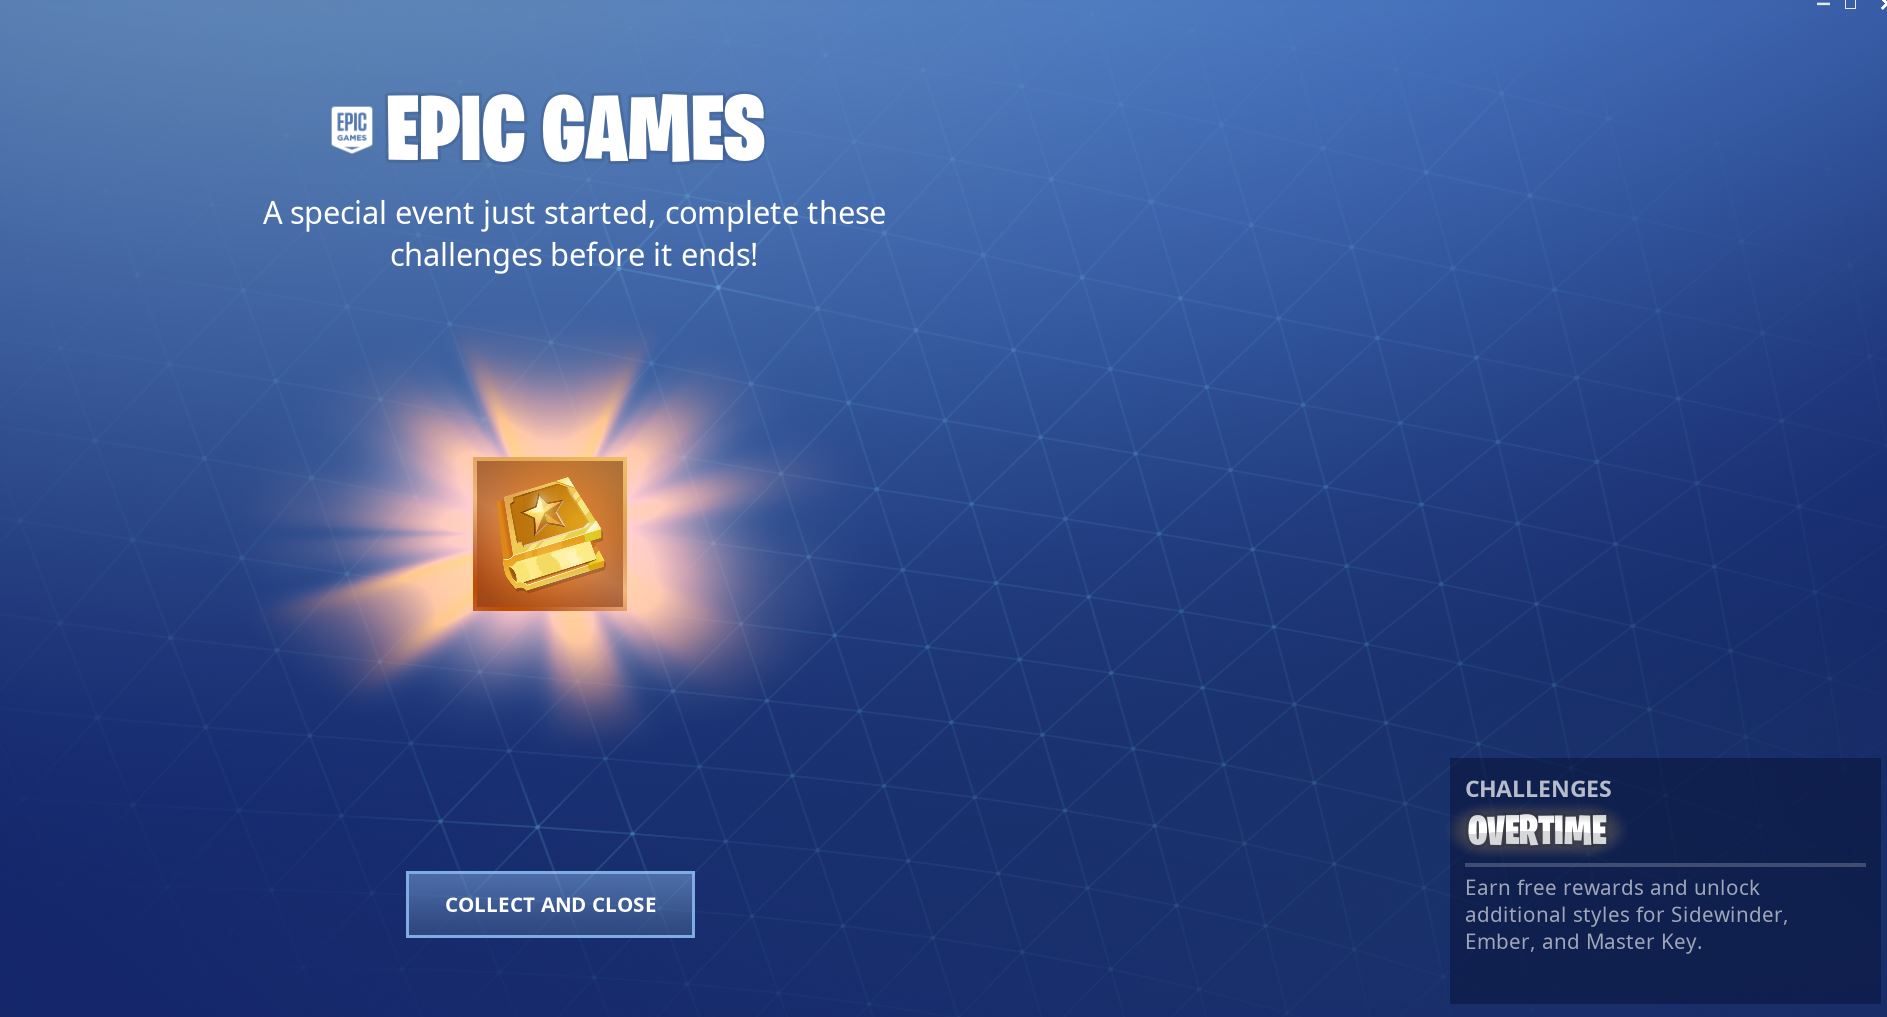 Fortnite Season 8 Overtime challenges and rewards